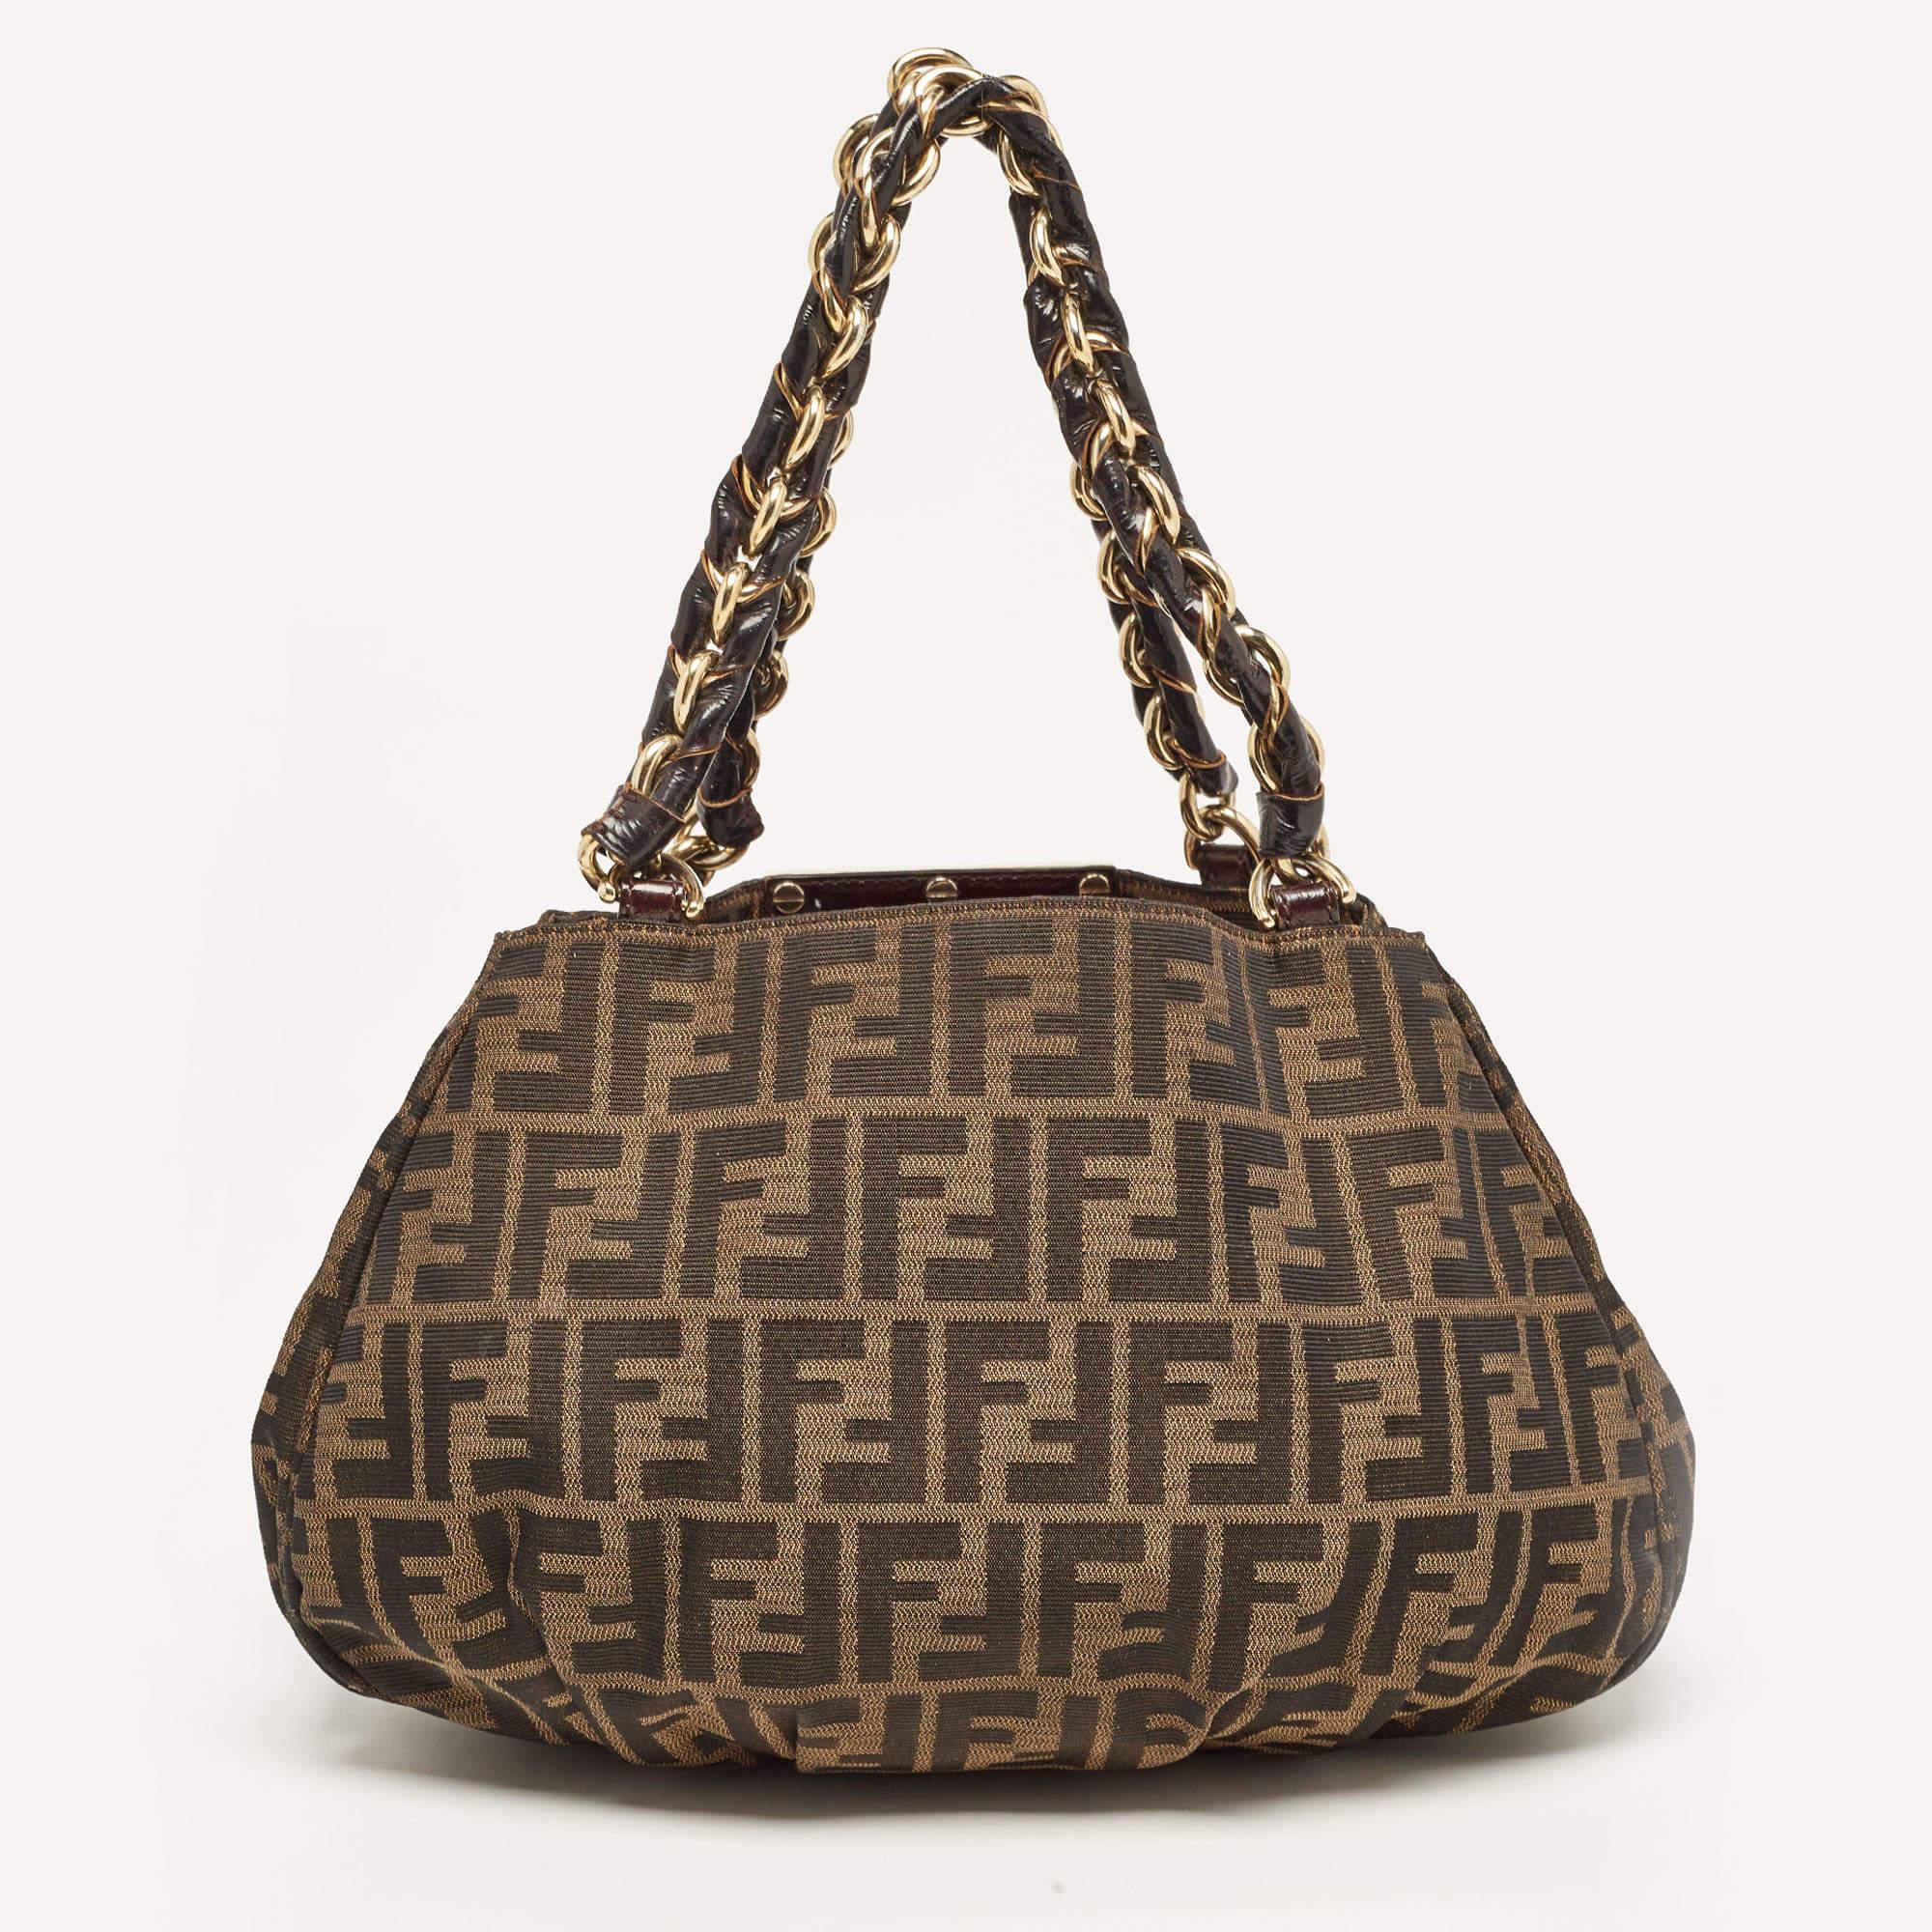 The Fendi Mia shoulder bag exudes timeless elegance with its iconic monogram pattern and rich tobacco hue. Crafted from premium canvas, it features a chic shoulder strap for effortless carrying, making it the epitome of sophistication and